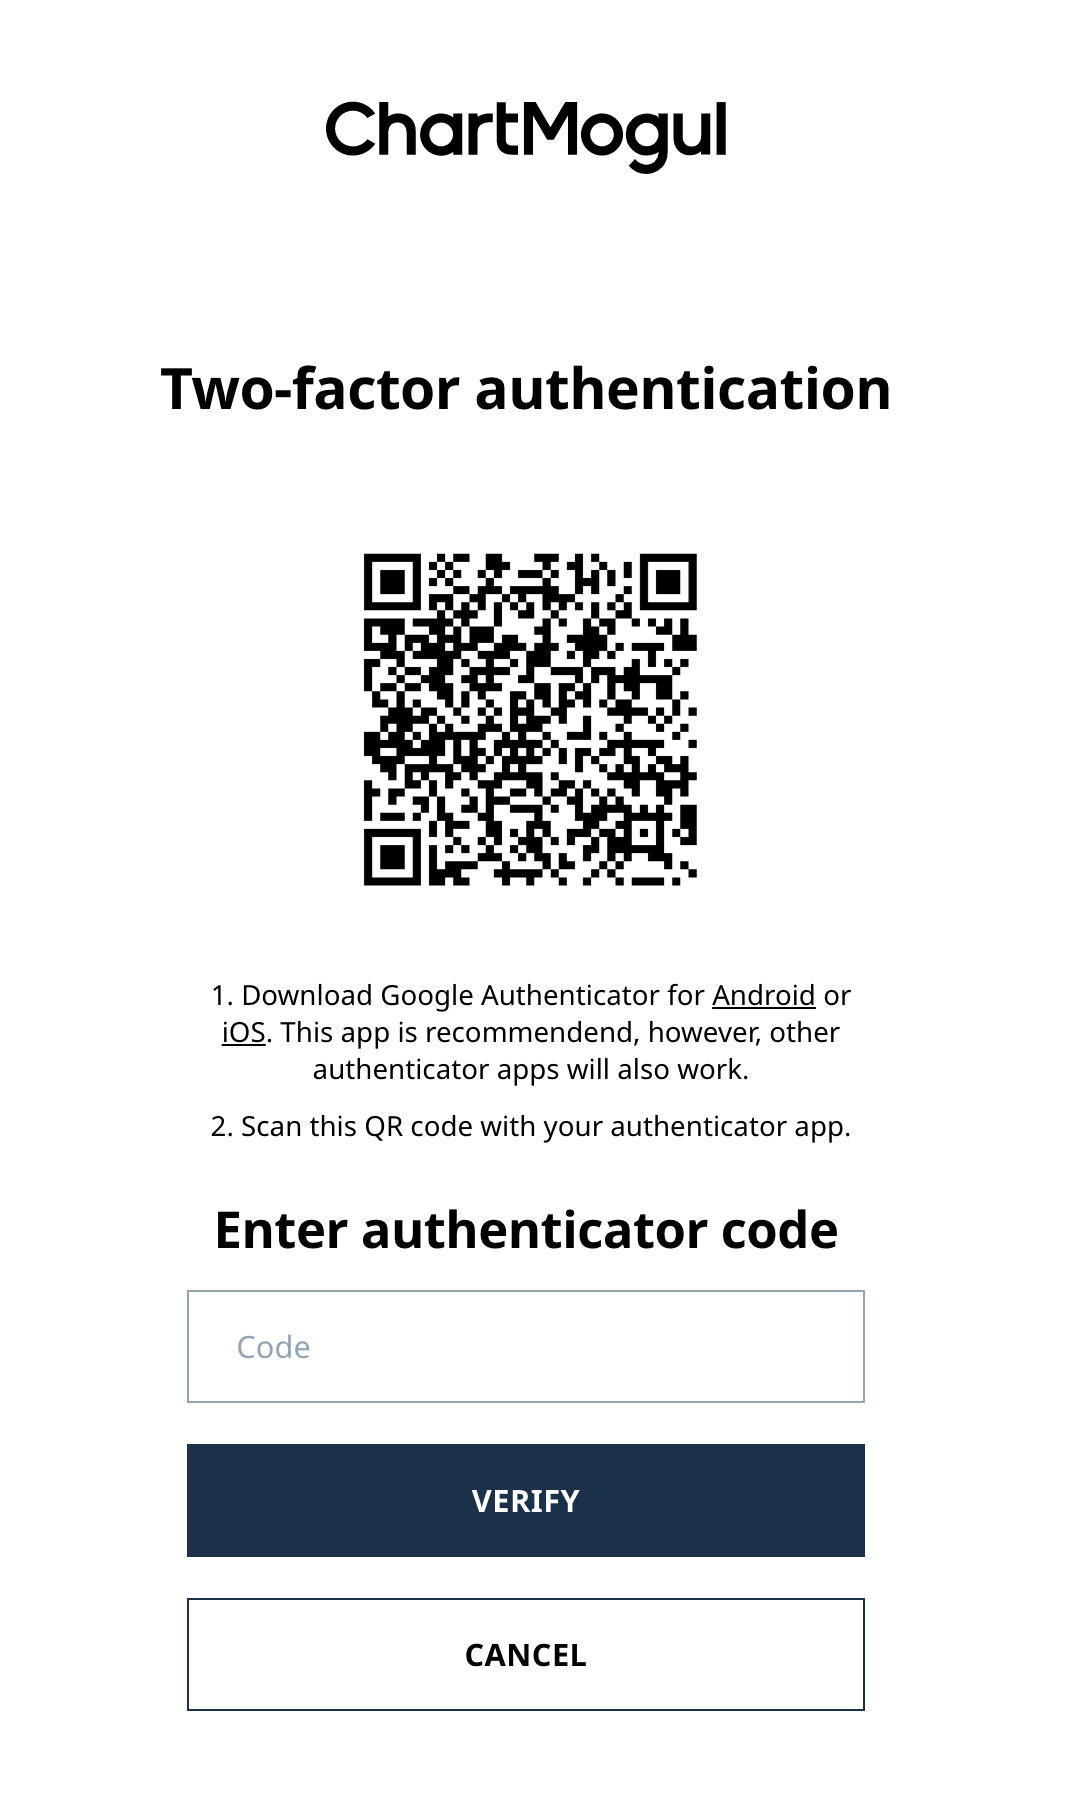 Screenshot of the Two-factor authentication screen with a QR code and a field to enter an authenticator code. Below the field there are two buttons: Verify and Cancel.